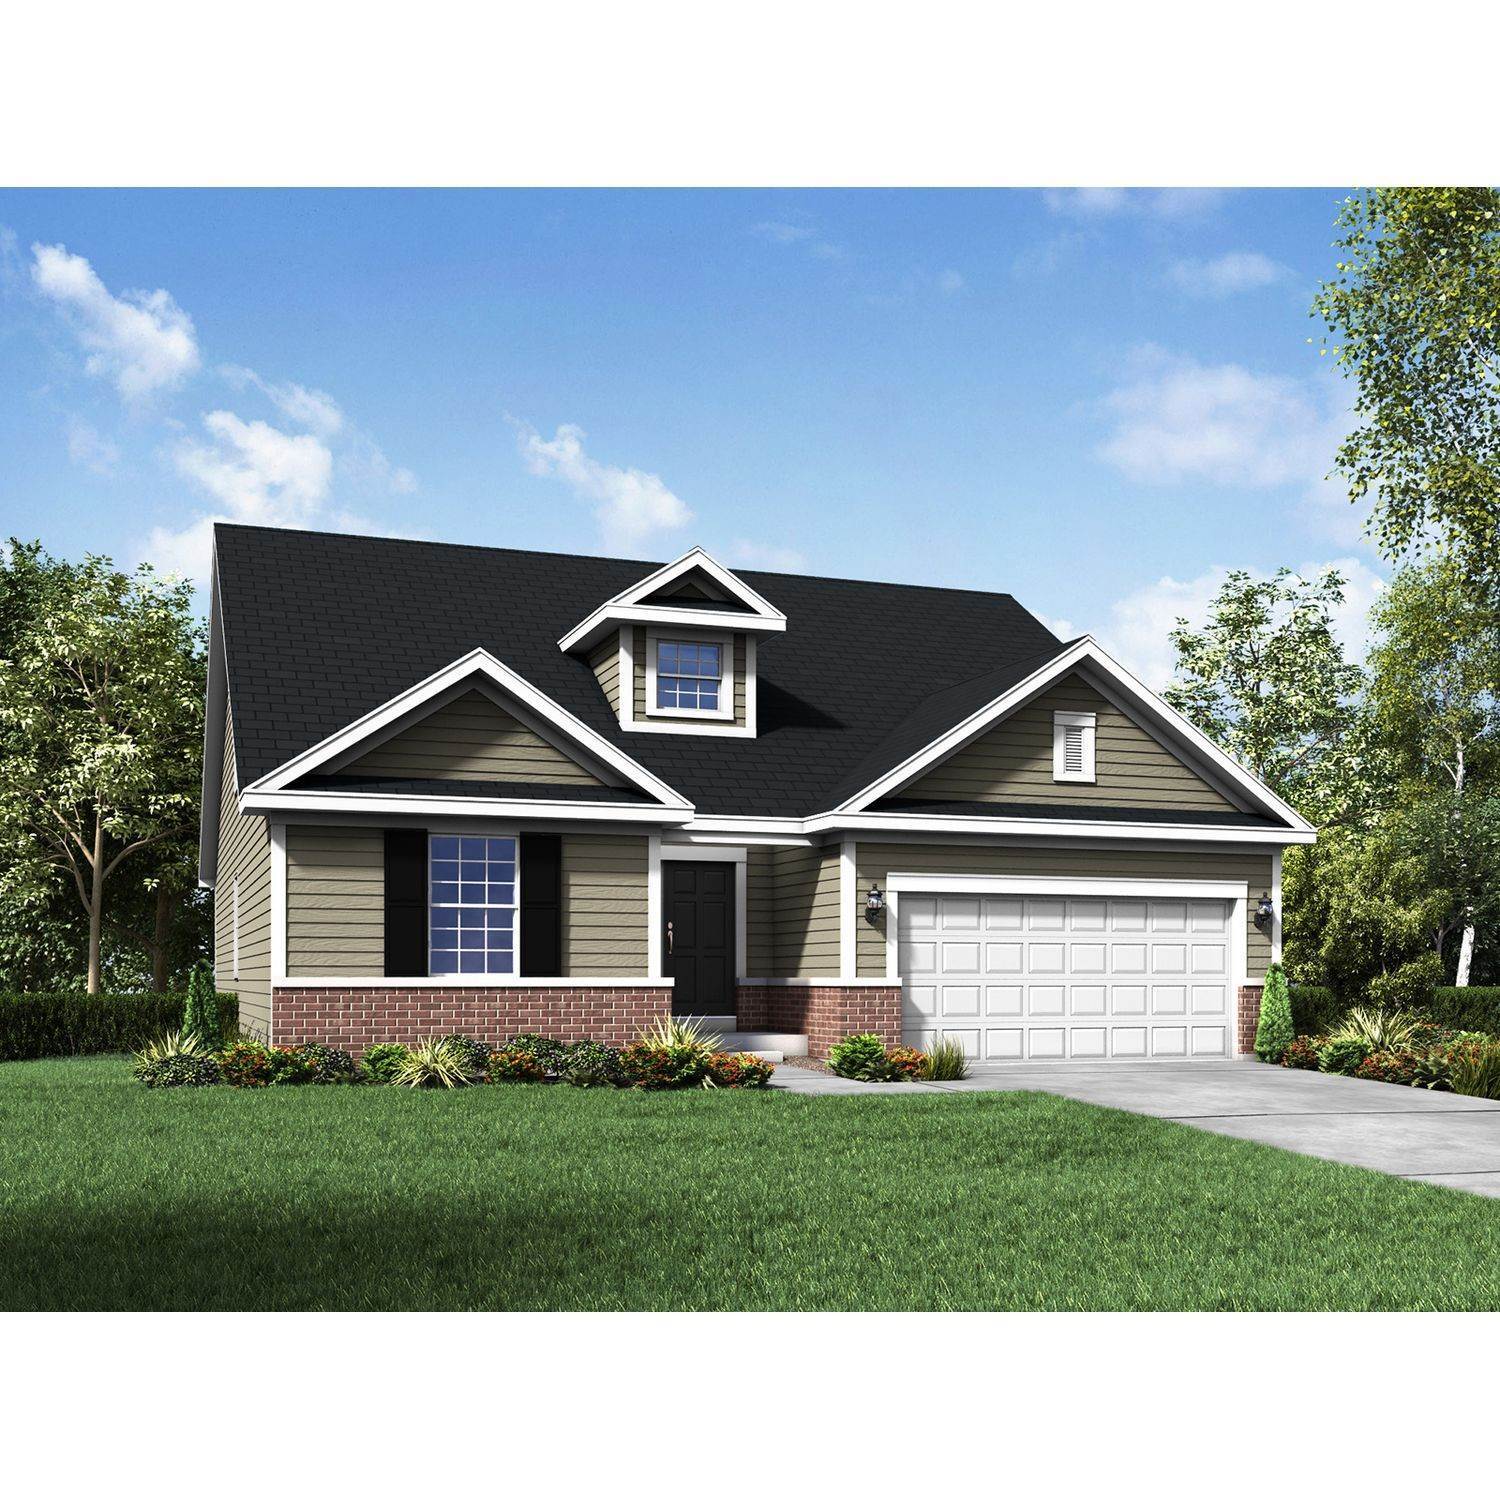 19. Single Family for Sale at Sun Prairie, WI 53590